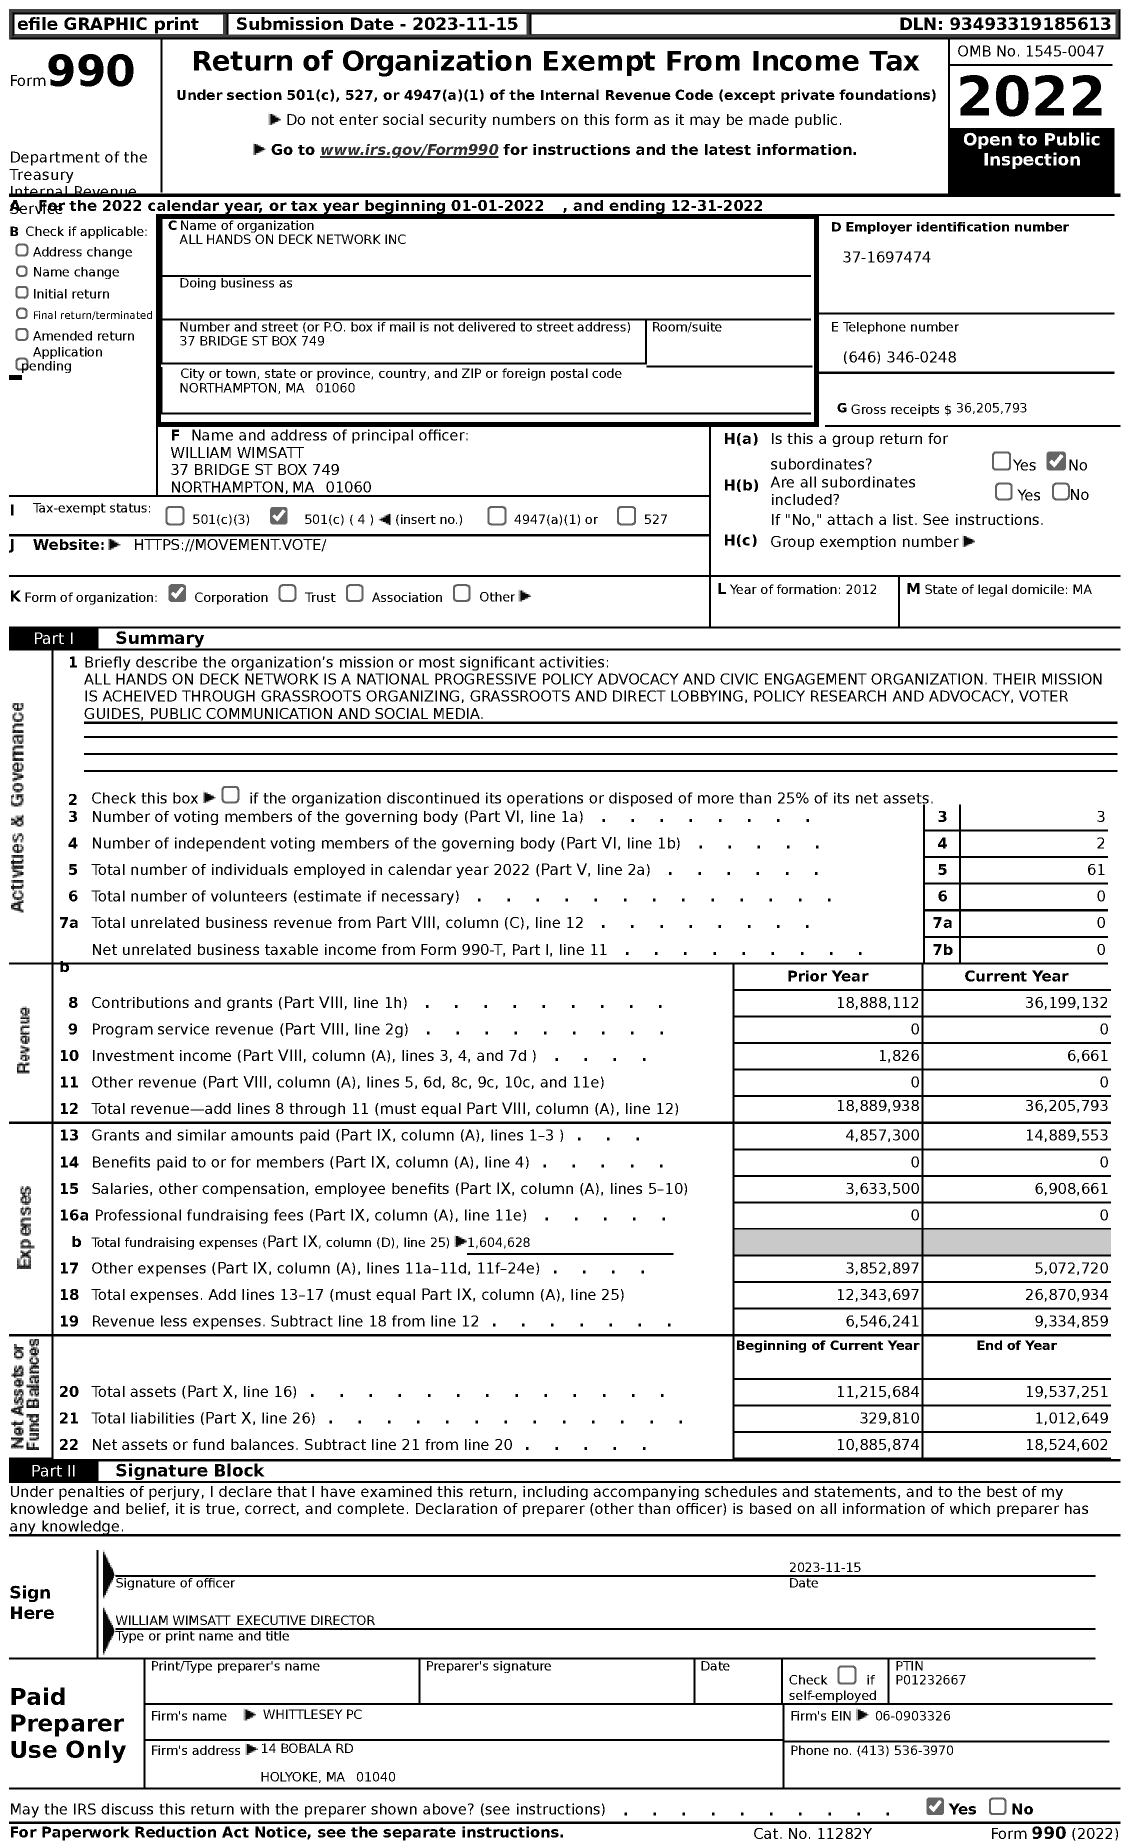 Image of first page of 2022 Form 990 for All Hands on Deck Network